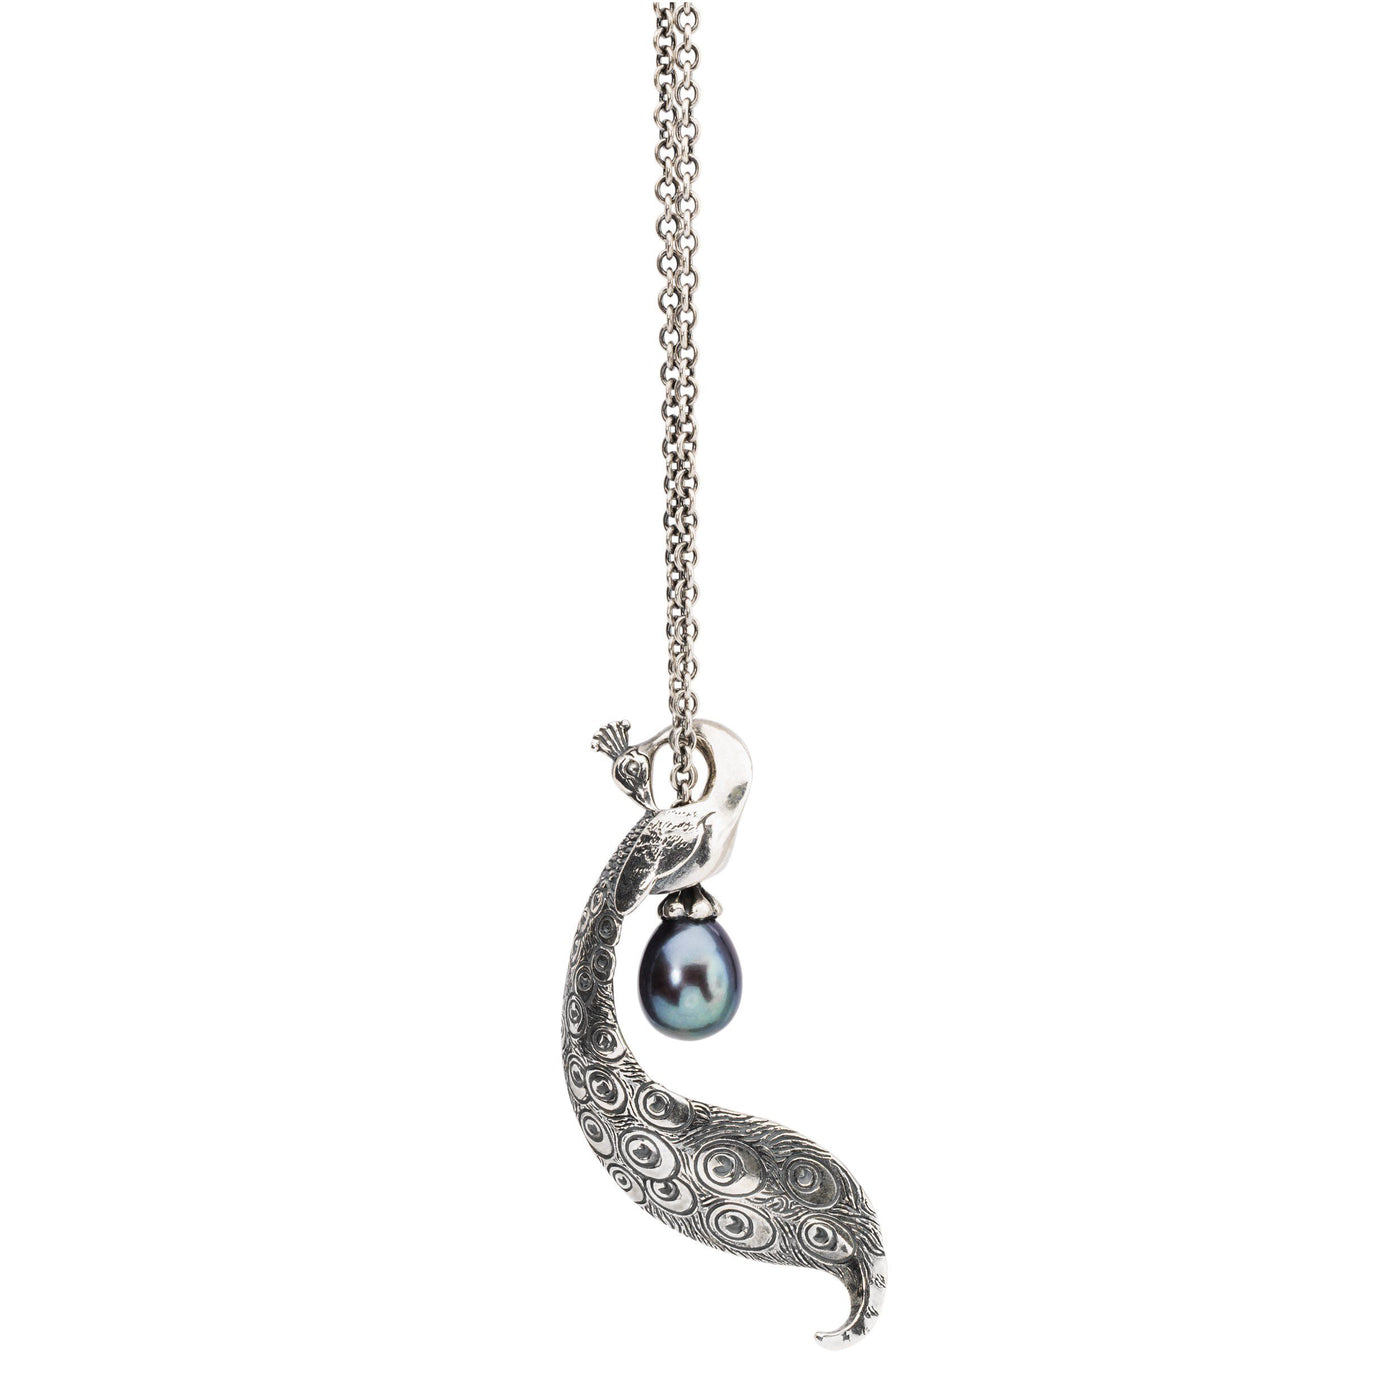 Fantasy Necklace with Peacock Pearl - Trollbeads Canada